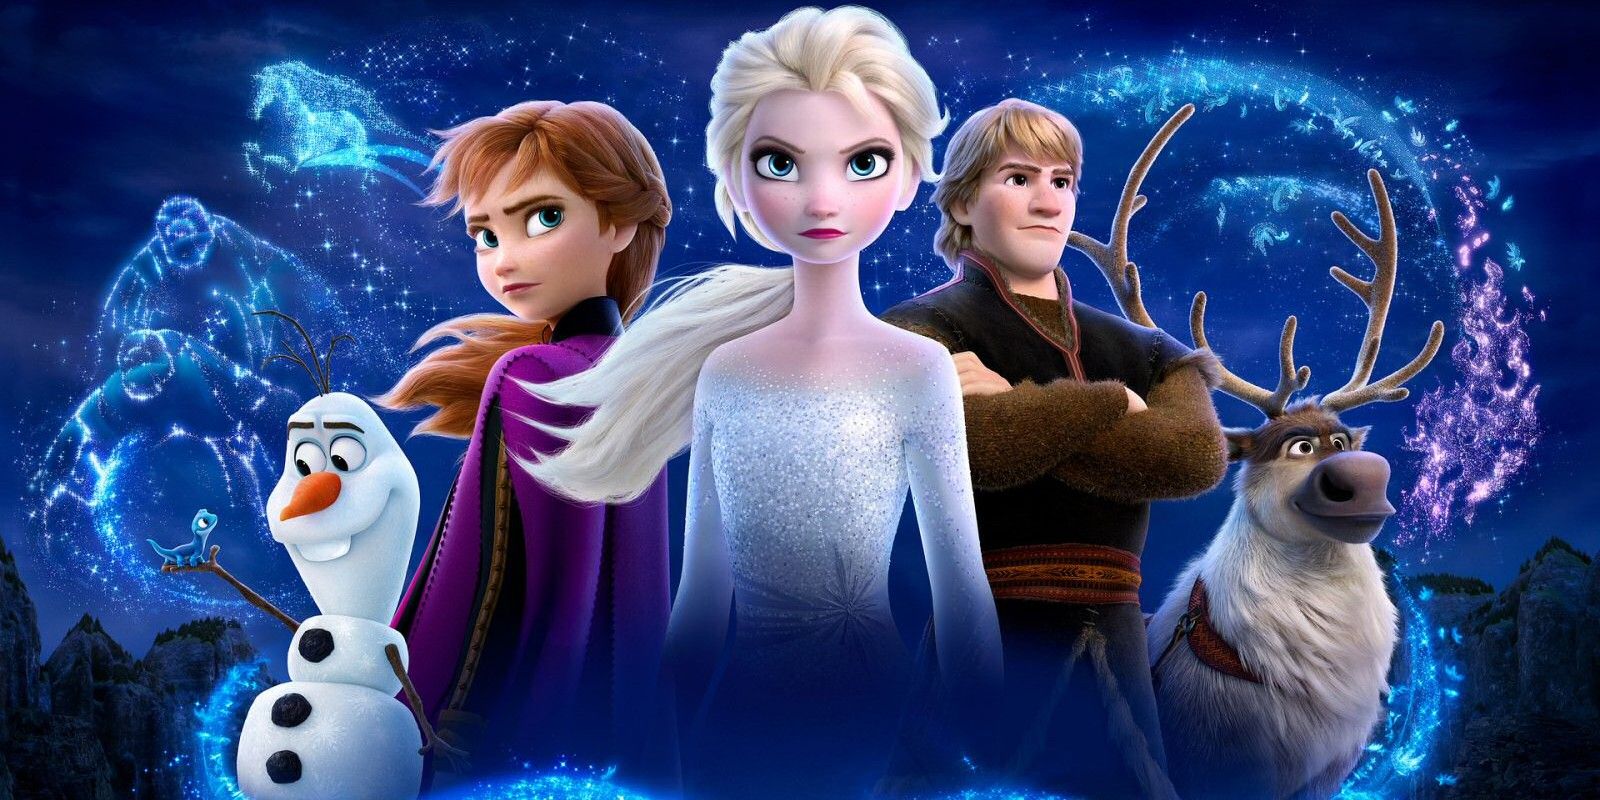 Frozen 2s Story Fixes Problems in Pocahontas & Avatar